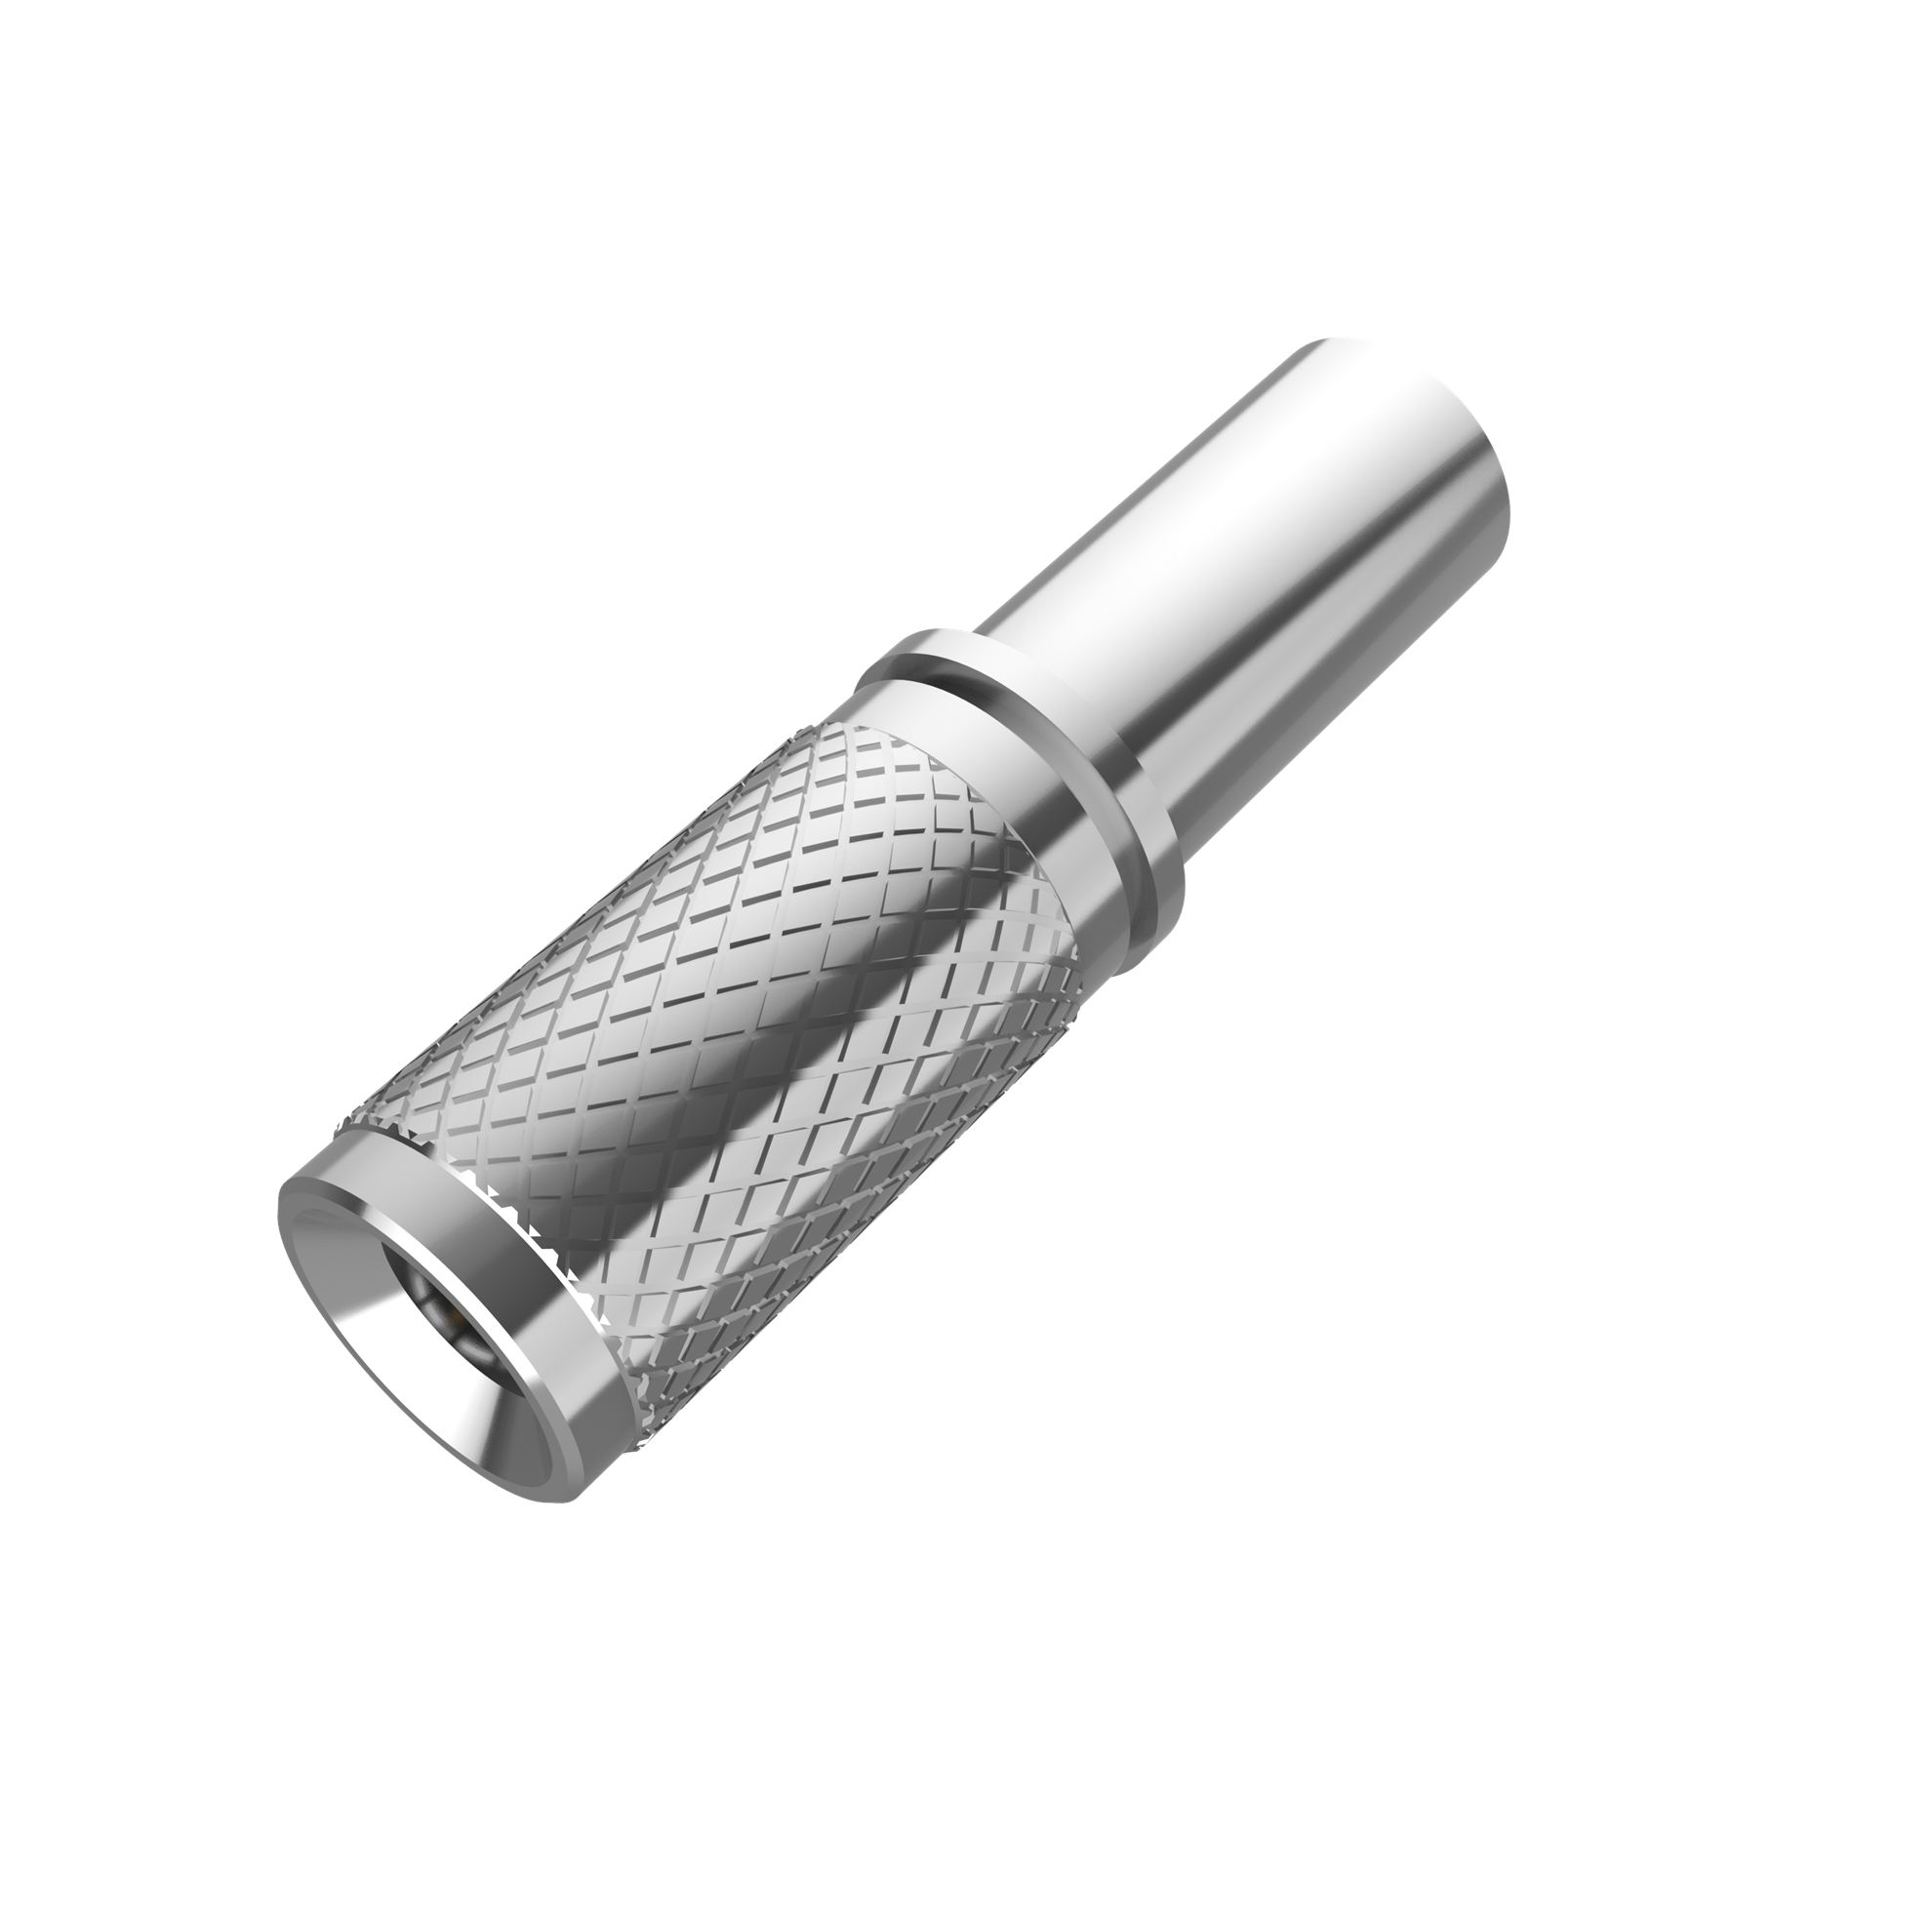 1.0/2.3 Connector Plug Straight Crimping For LMR200 Coaxial Cable